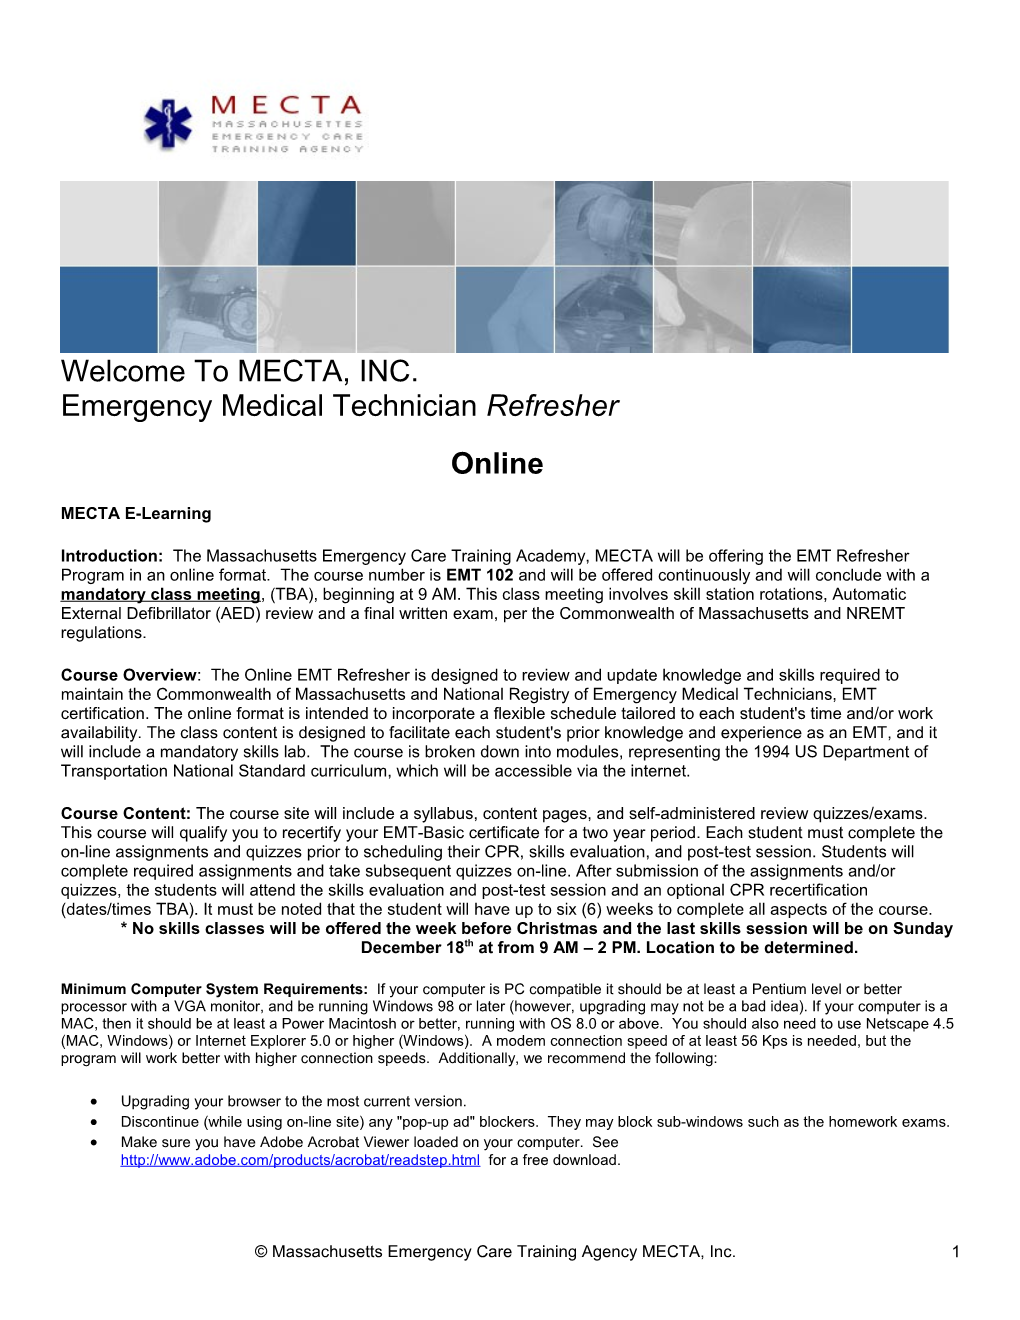 Welcome to MECTA, INC